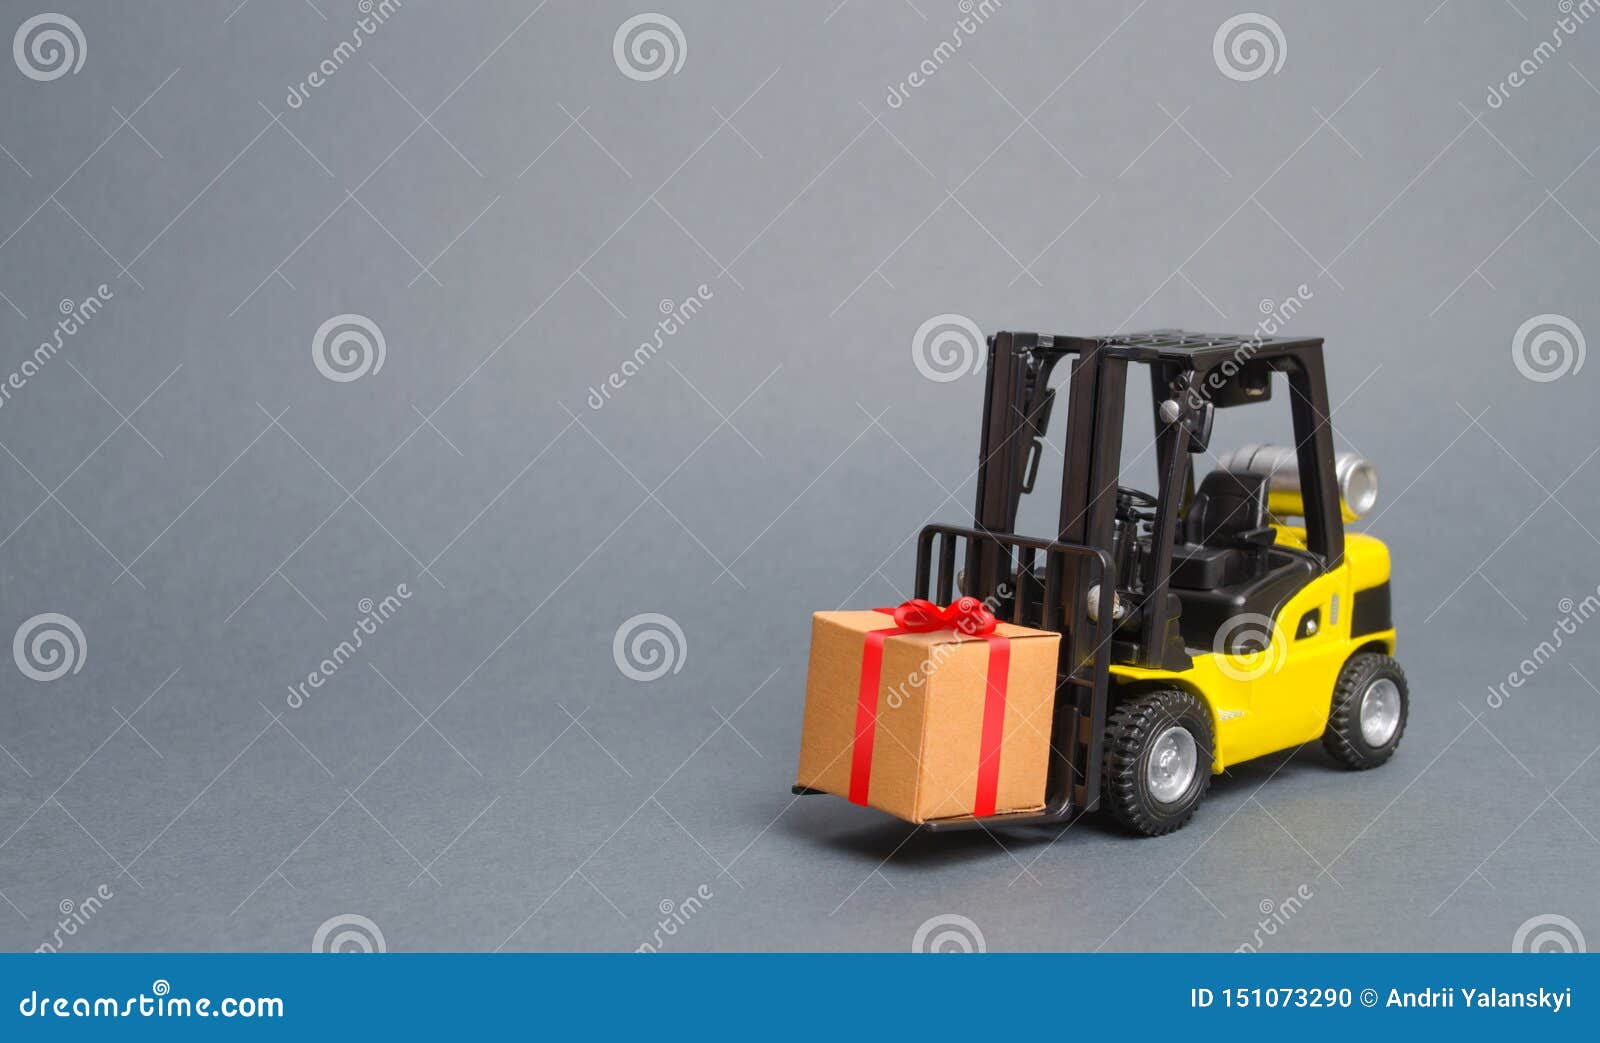 yellow forklift truck carries a gift with a red bow. purchase and delivery of a present. retail, discounts and contests